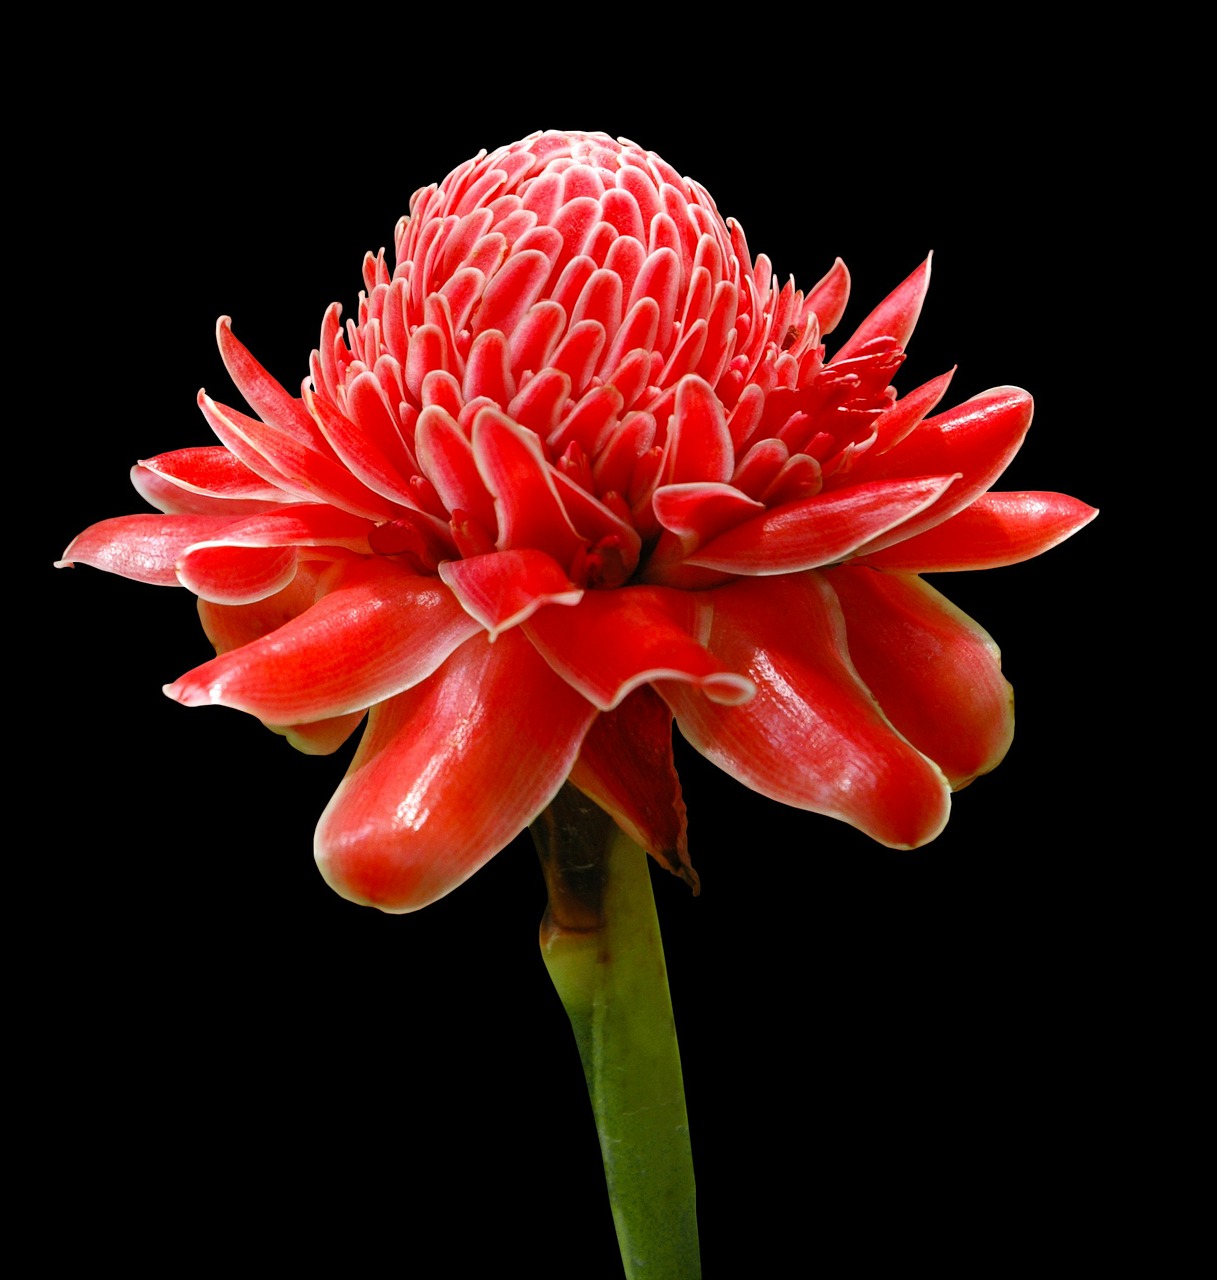 torch ginger blossom bloom free photo